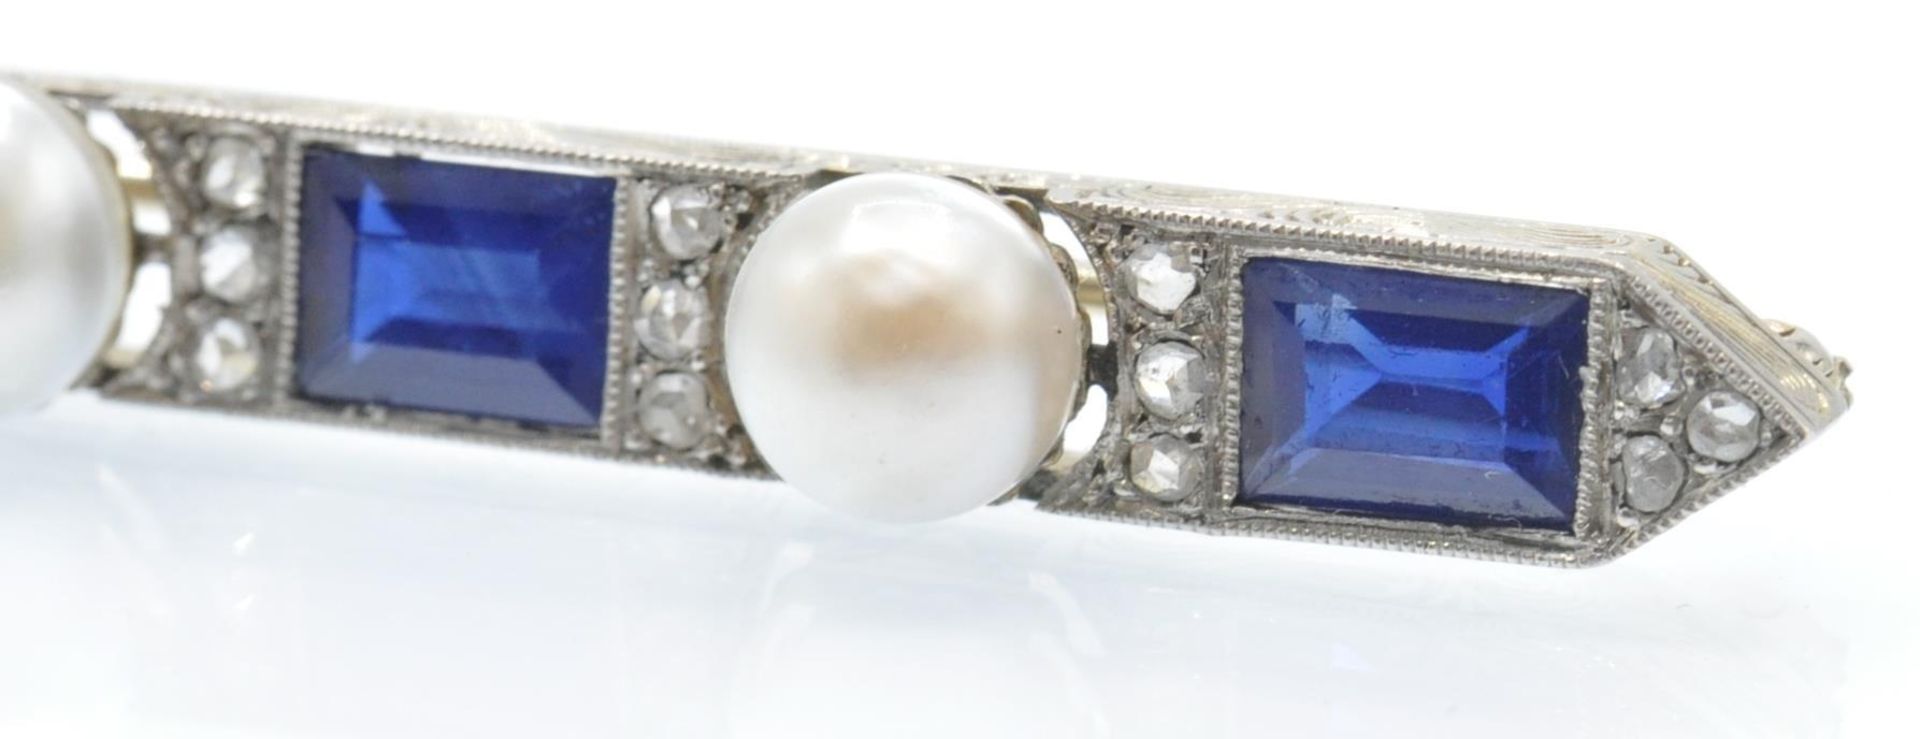 An Antique Gold Platinum, Sapphire Diamond & Pearl Brooch - Image 3 of 6